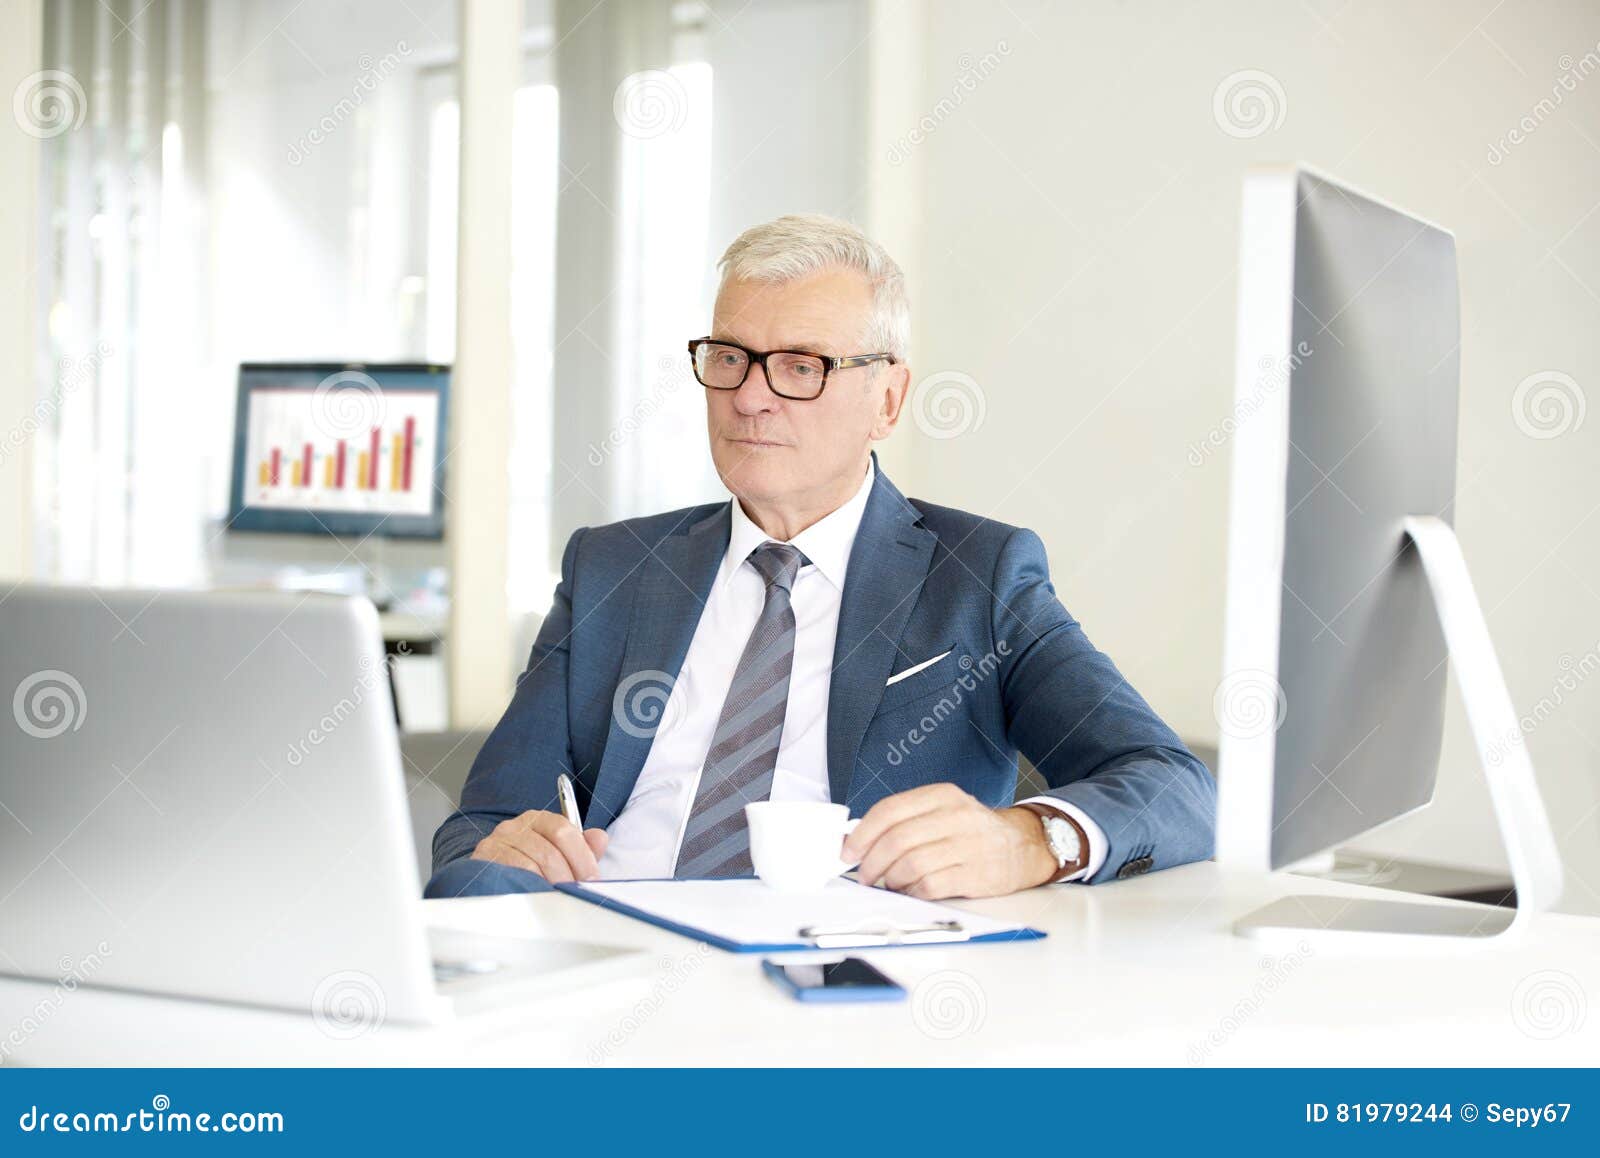 Senior Professional Man in the Office Stock Photo - Image of ...